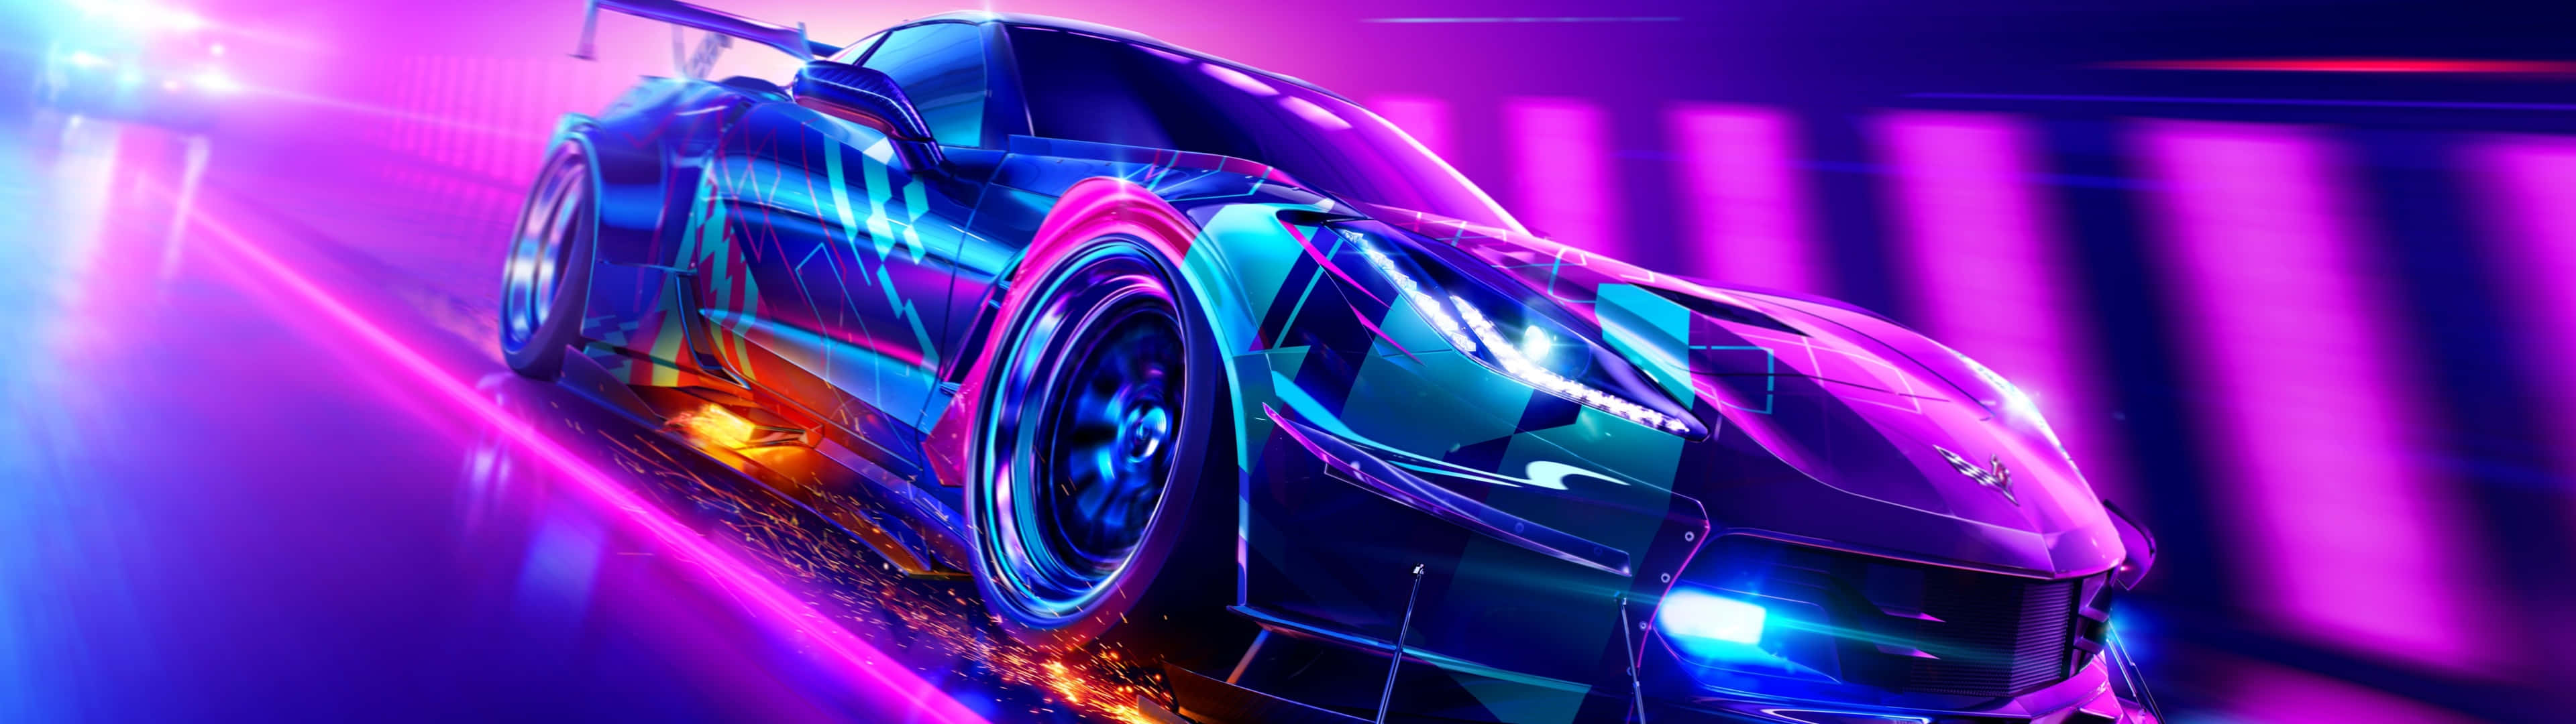 Need For Speed 3840 X 1080 Gaming Wallpaper